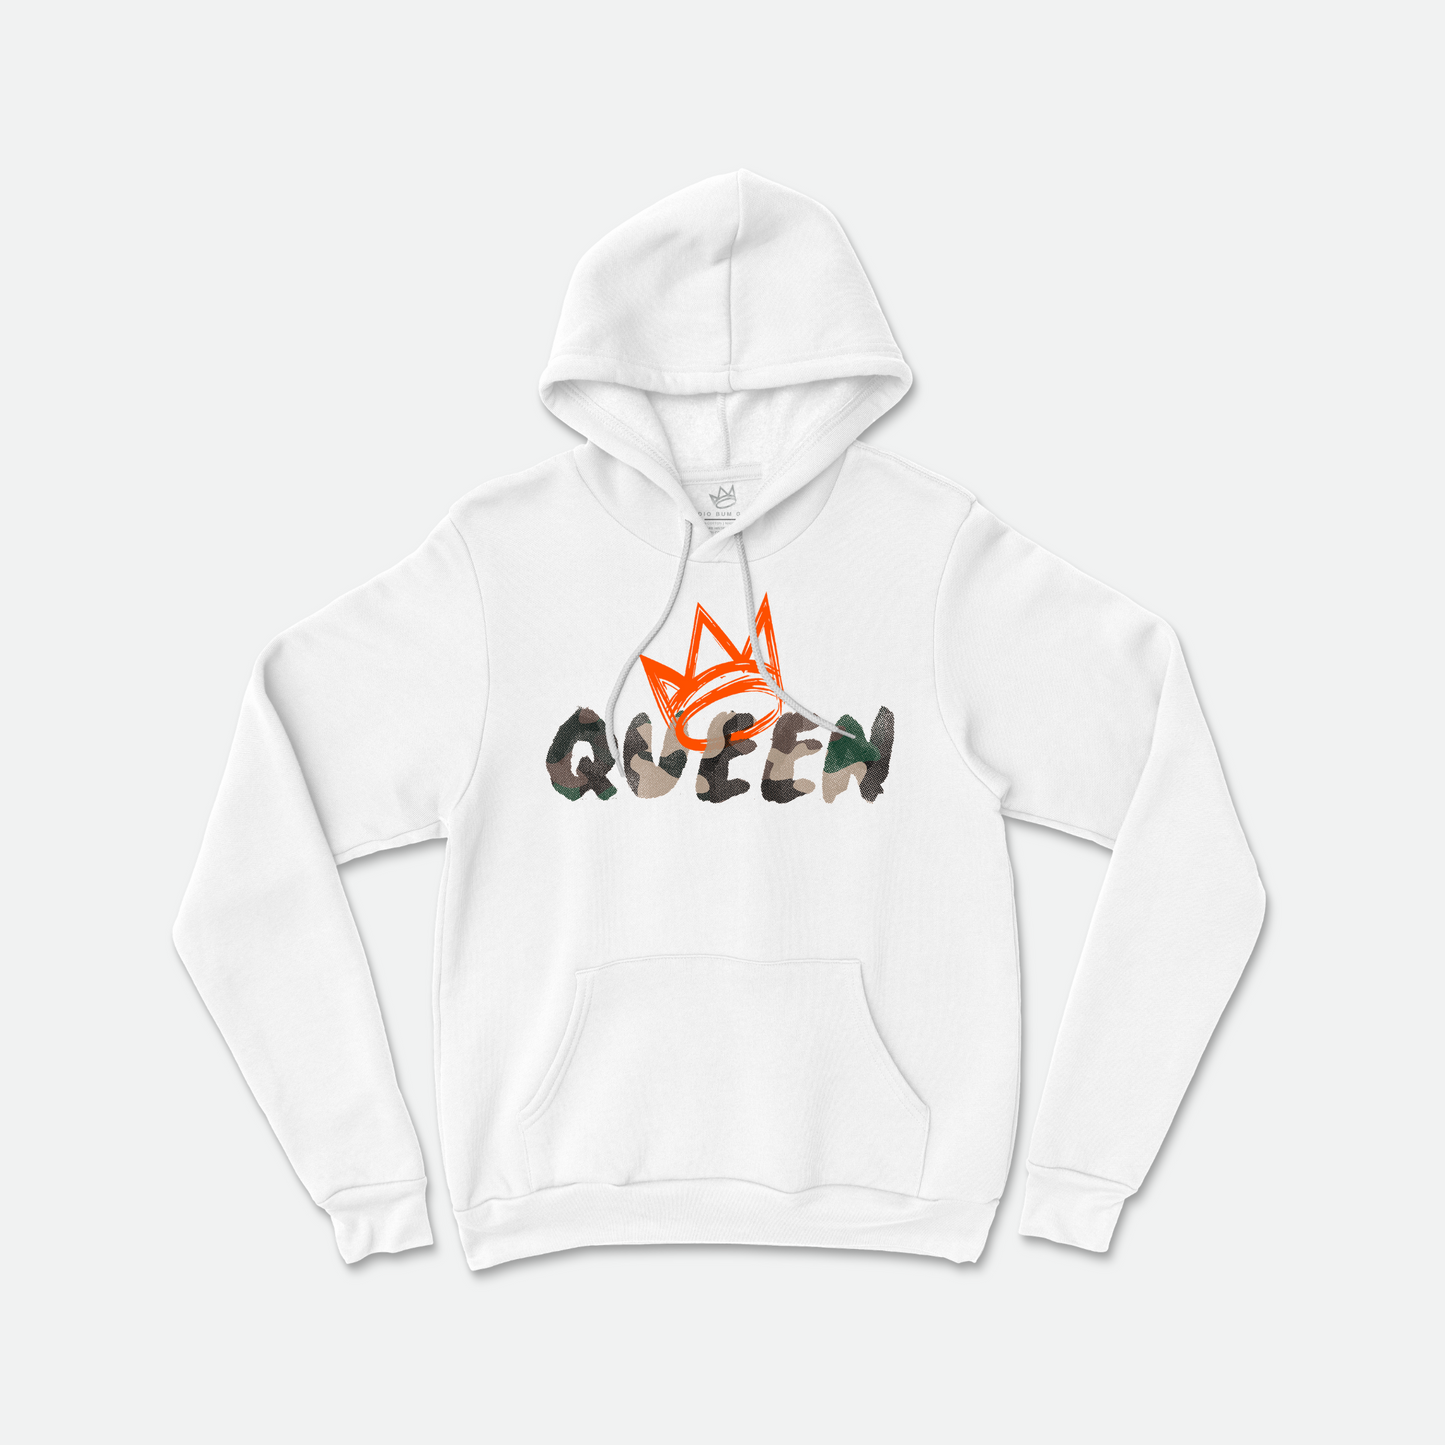 Queen Camouflage Collection Hoodies